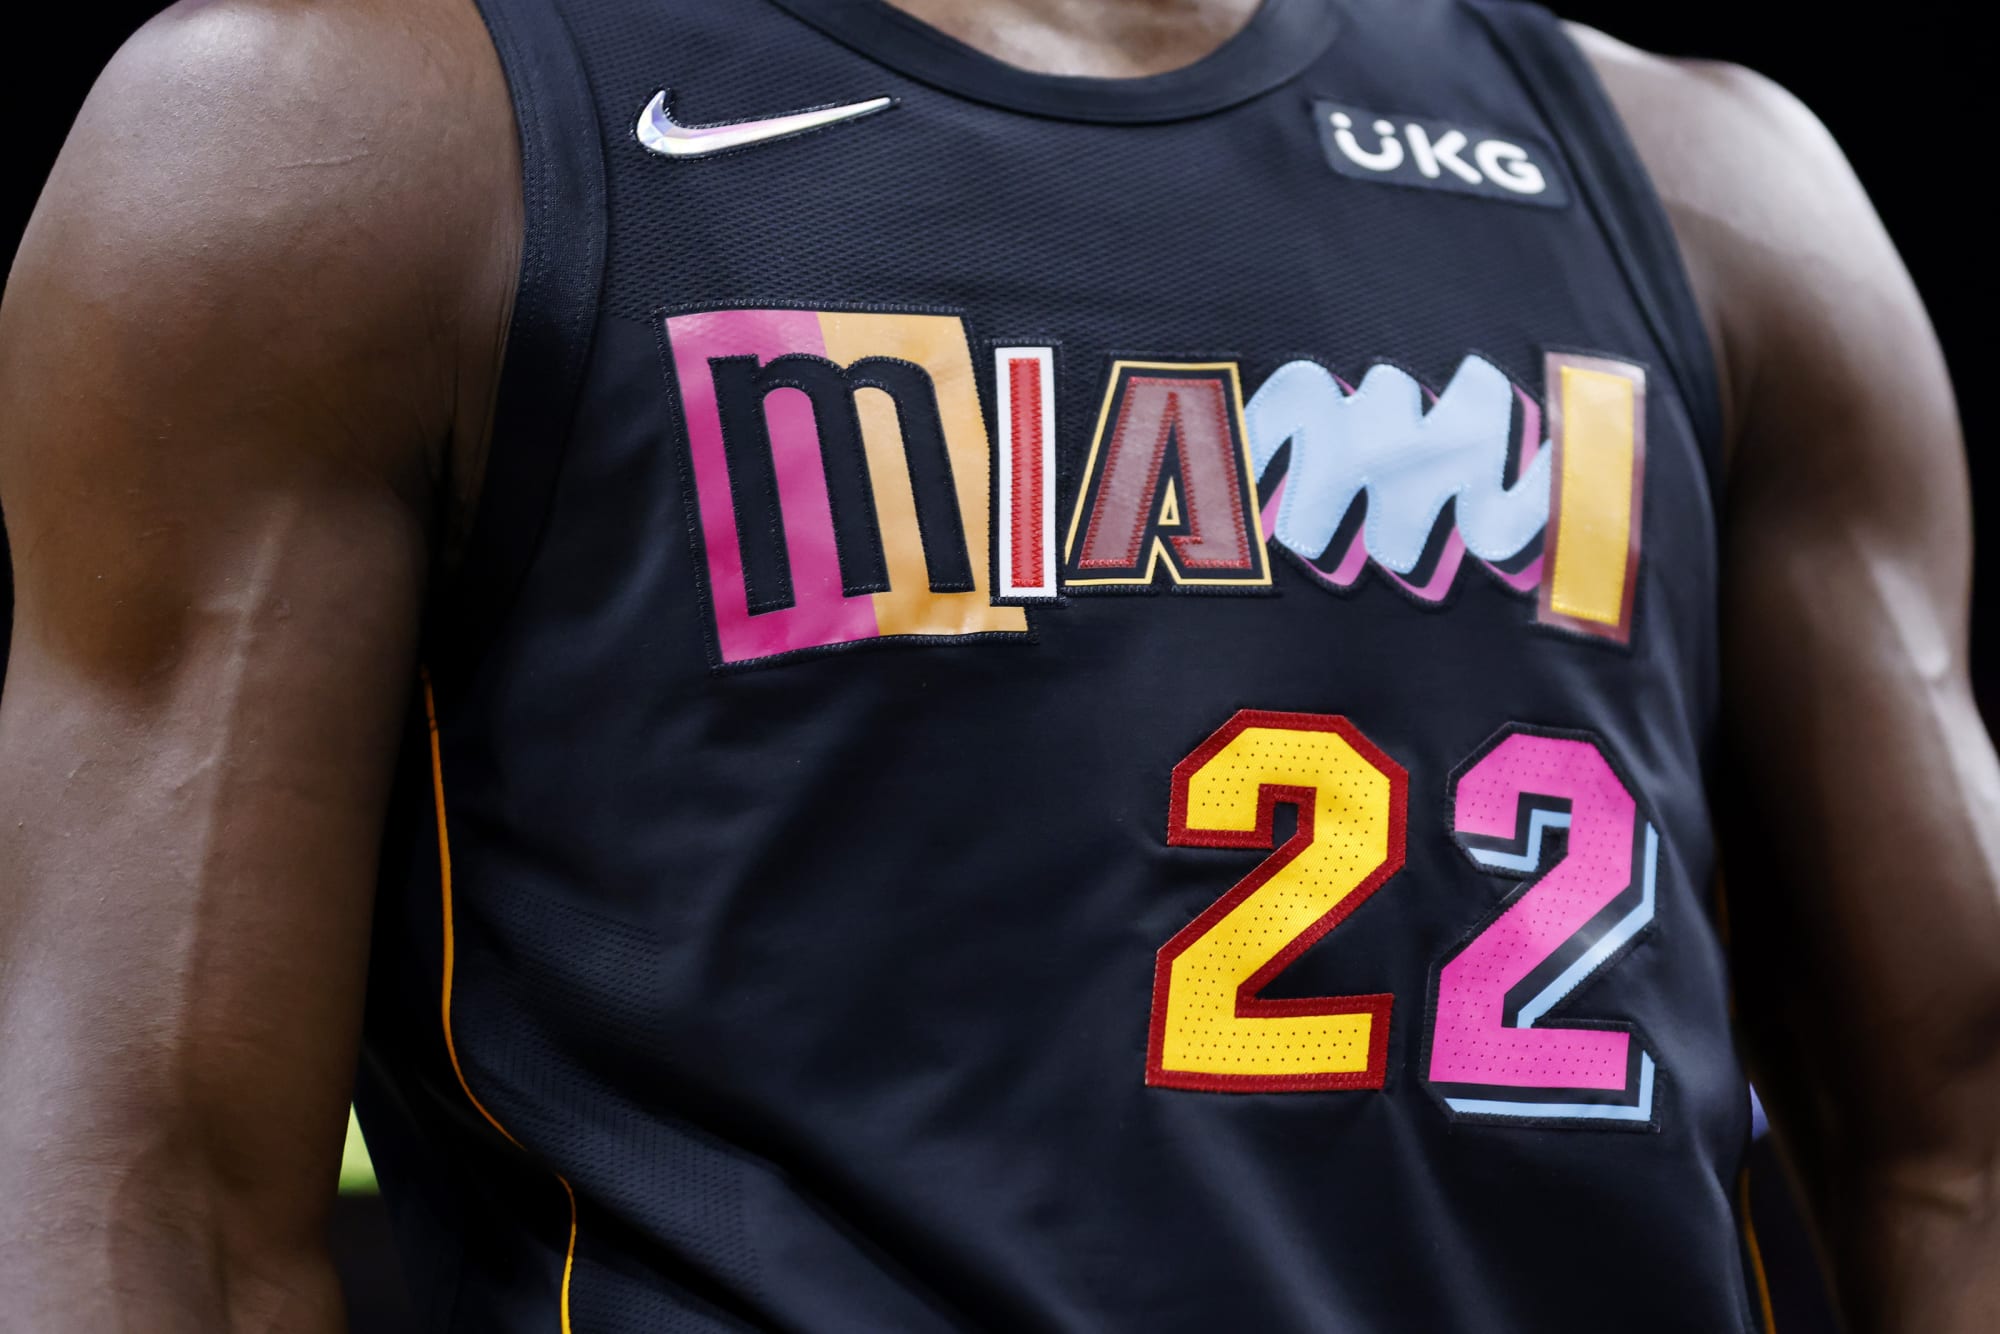 Ranking the NBA City Edition jerseys for 2021-22 from worst to best